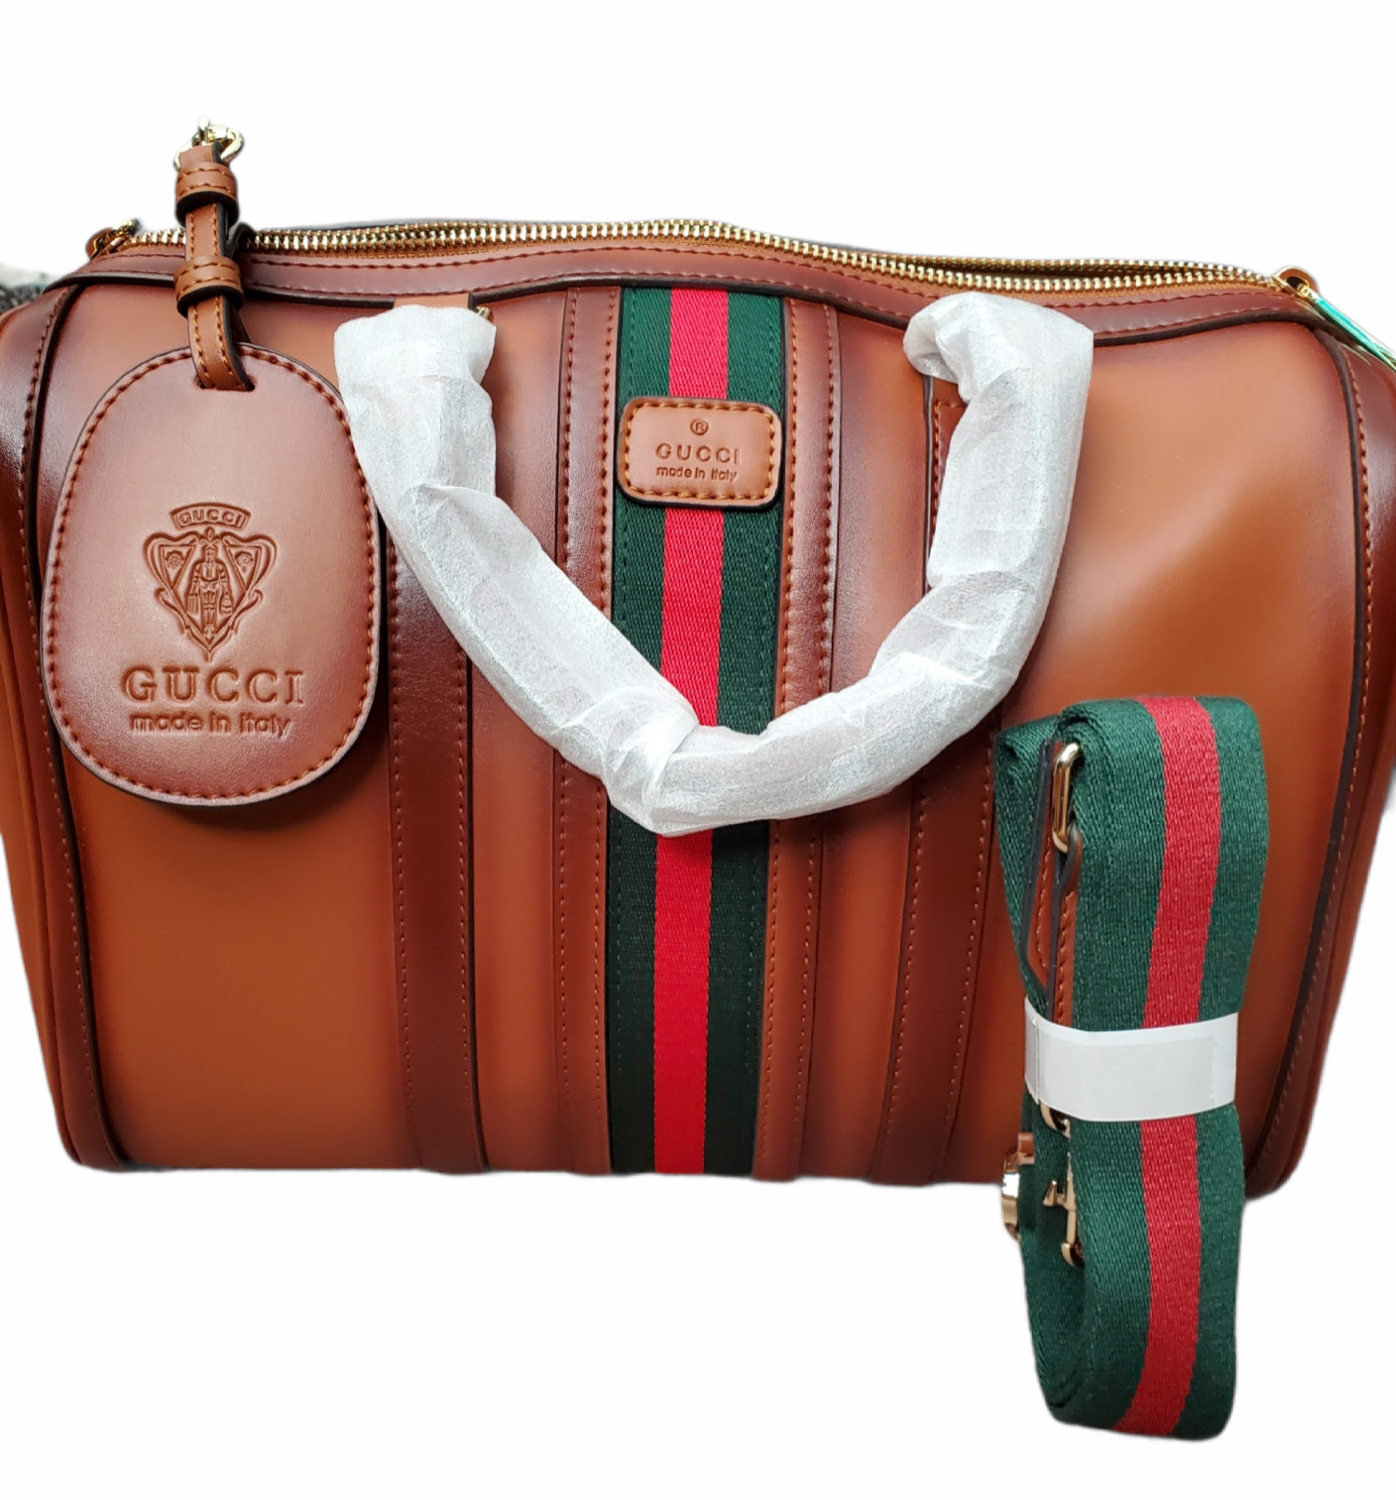 Gucci Doctor Bag Large